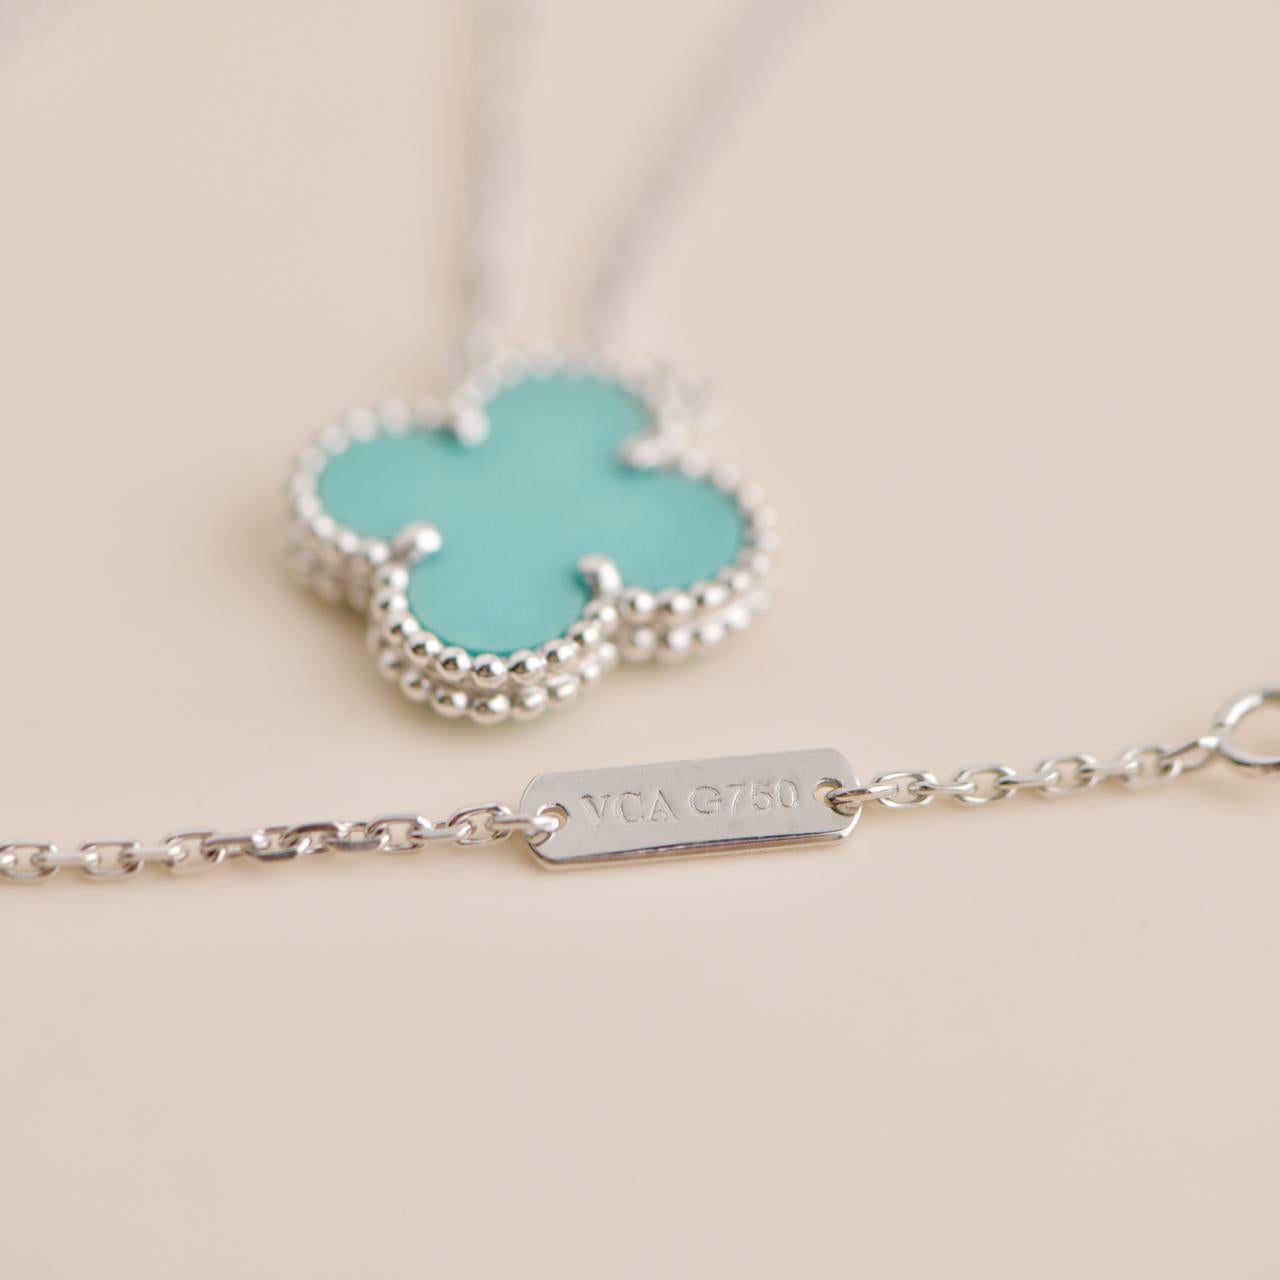 Van Cleef & Arpels Vintage Alhambra White Gold Turquoise Pendant Necklace In Excellent Condition For Sale In Banbury, GB